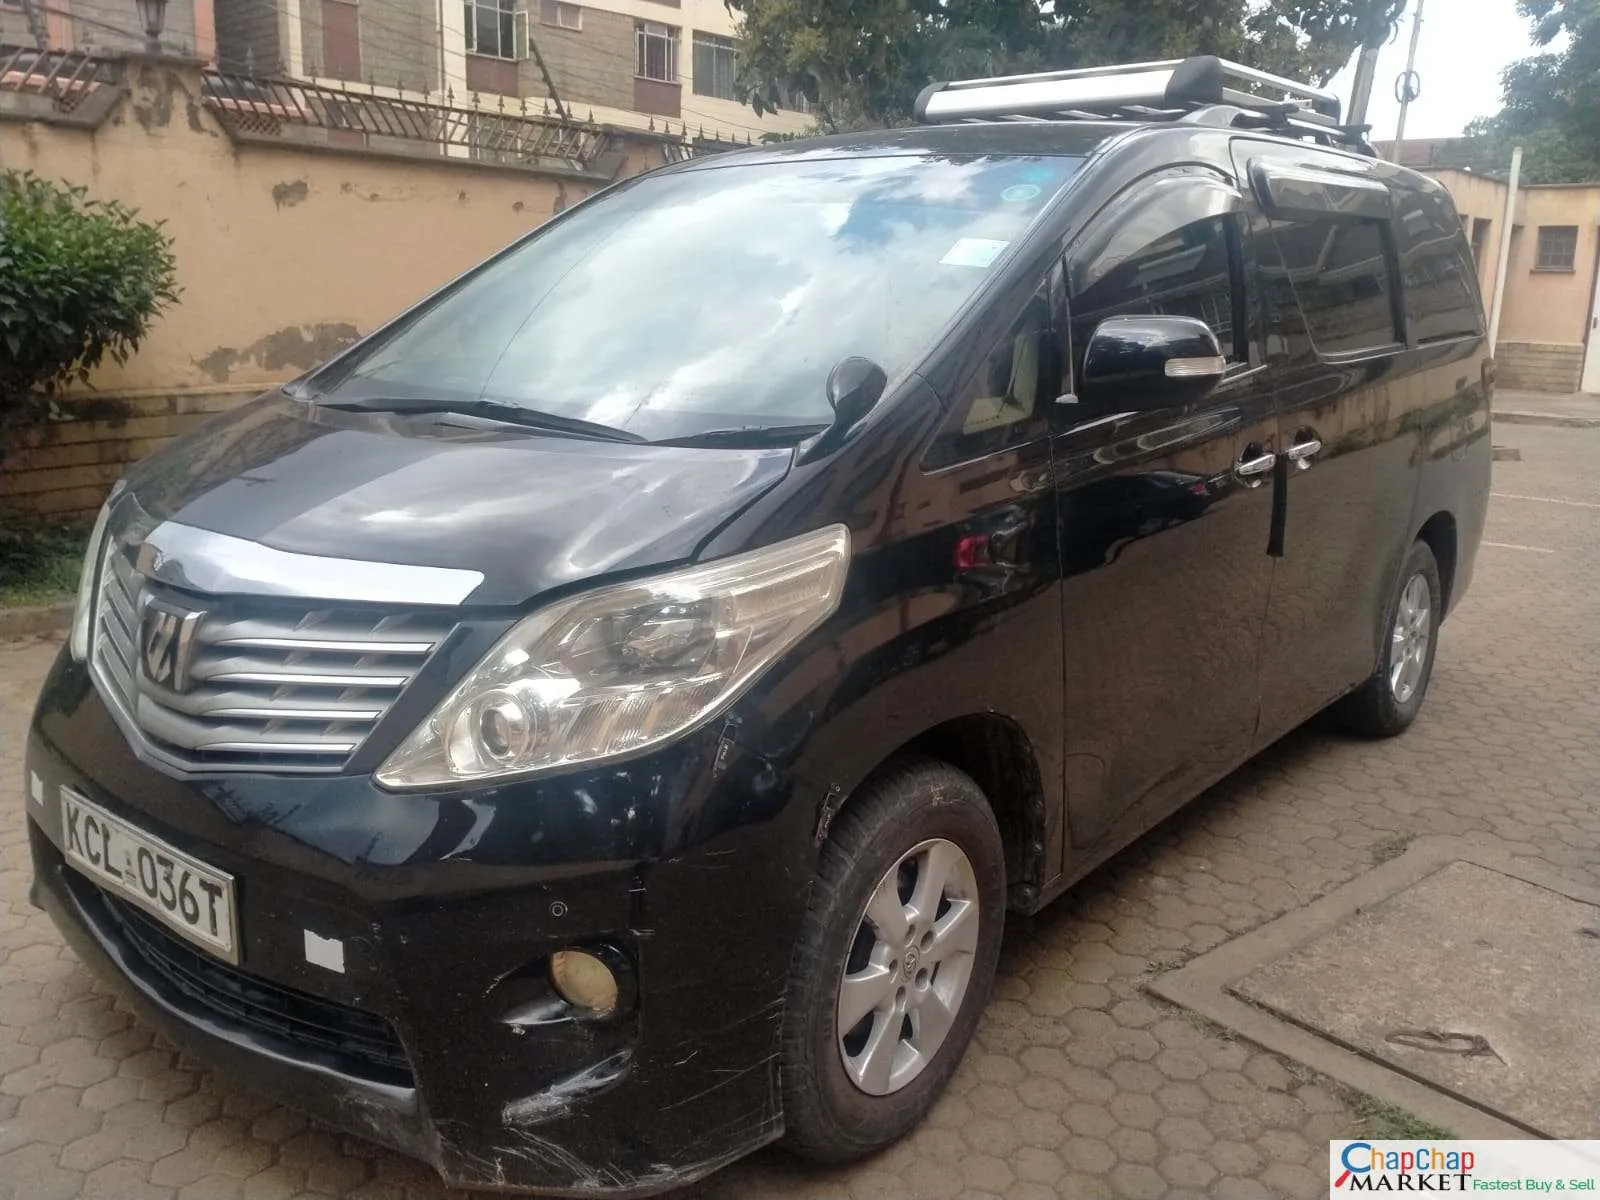 Cars Cars For Sale/Vehicles-Toyota Alphard Asian Owner You Pay 30% Deposit Trade in OK EXCLUSIVE 9